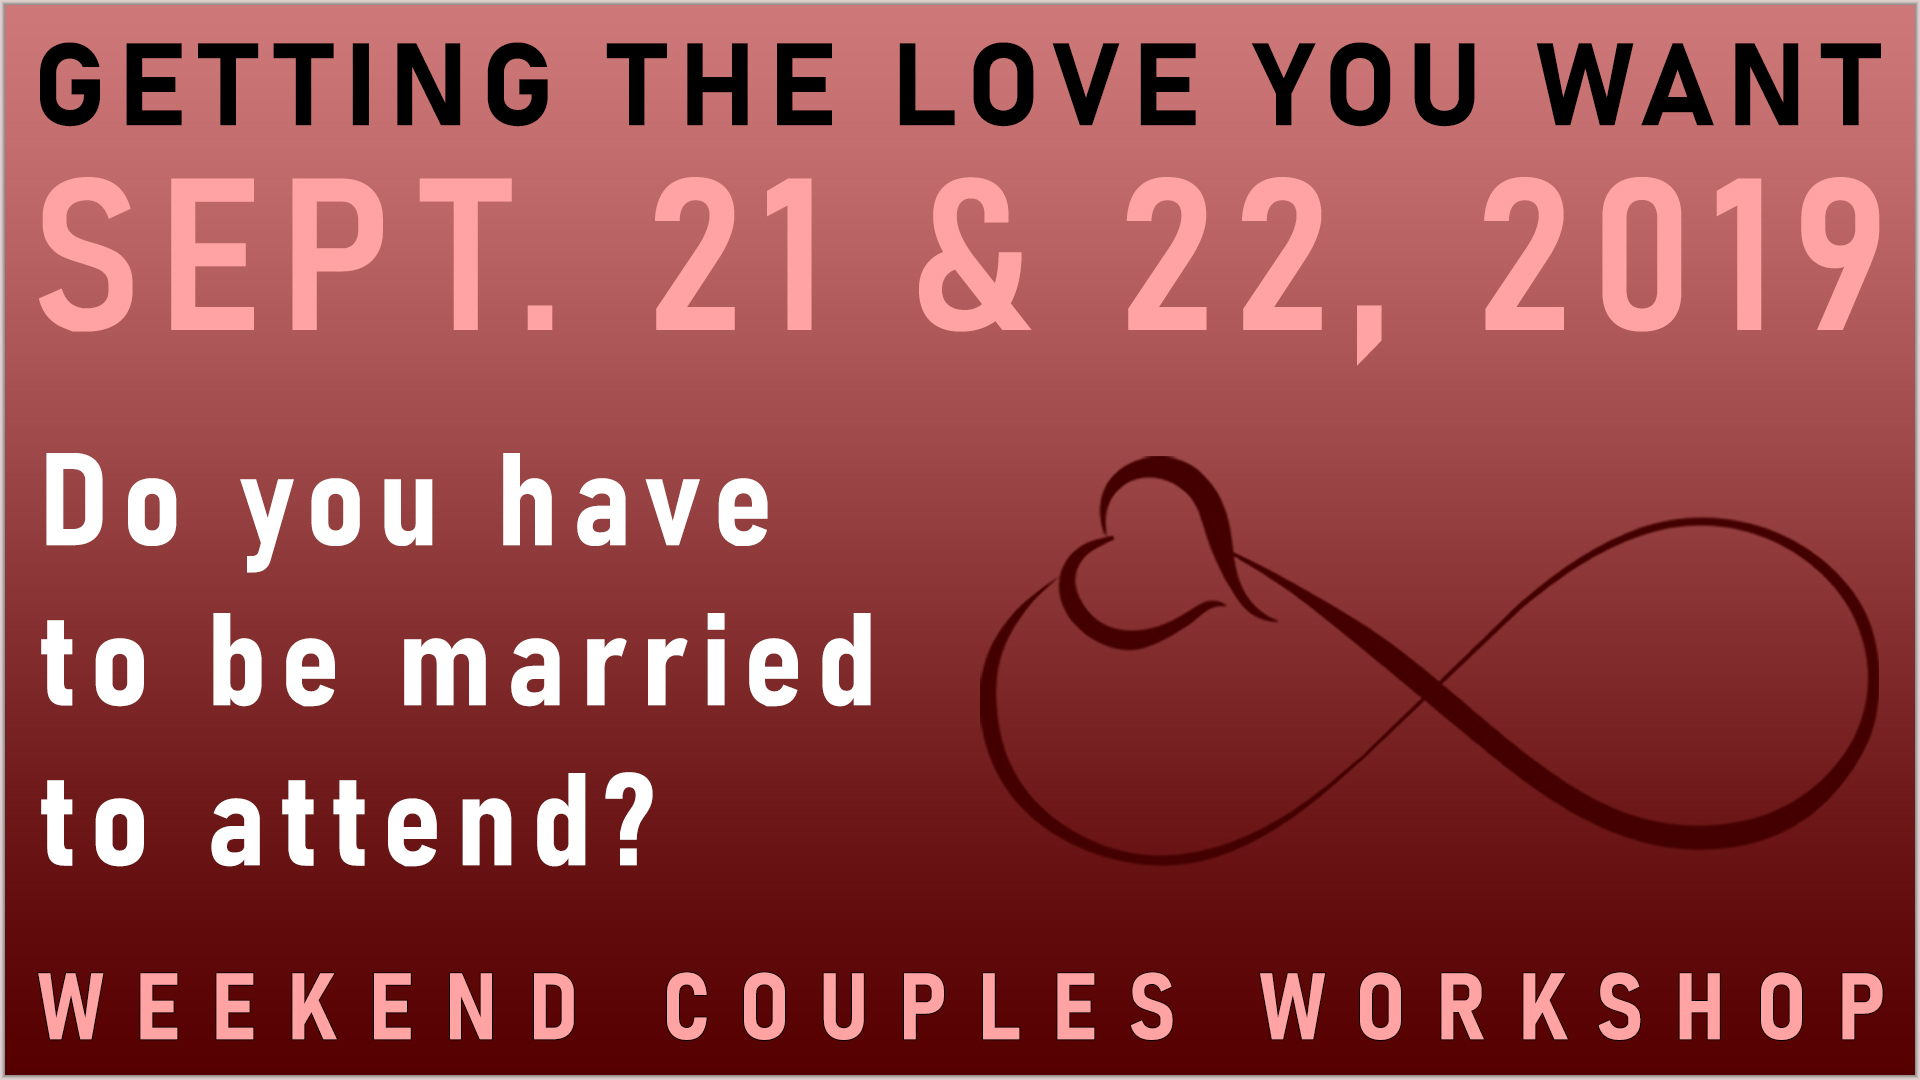 You DON’T have to be married to attend GETTING THE LOVE YOU WANT